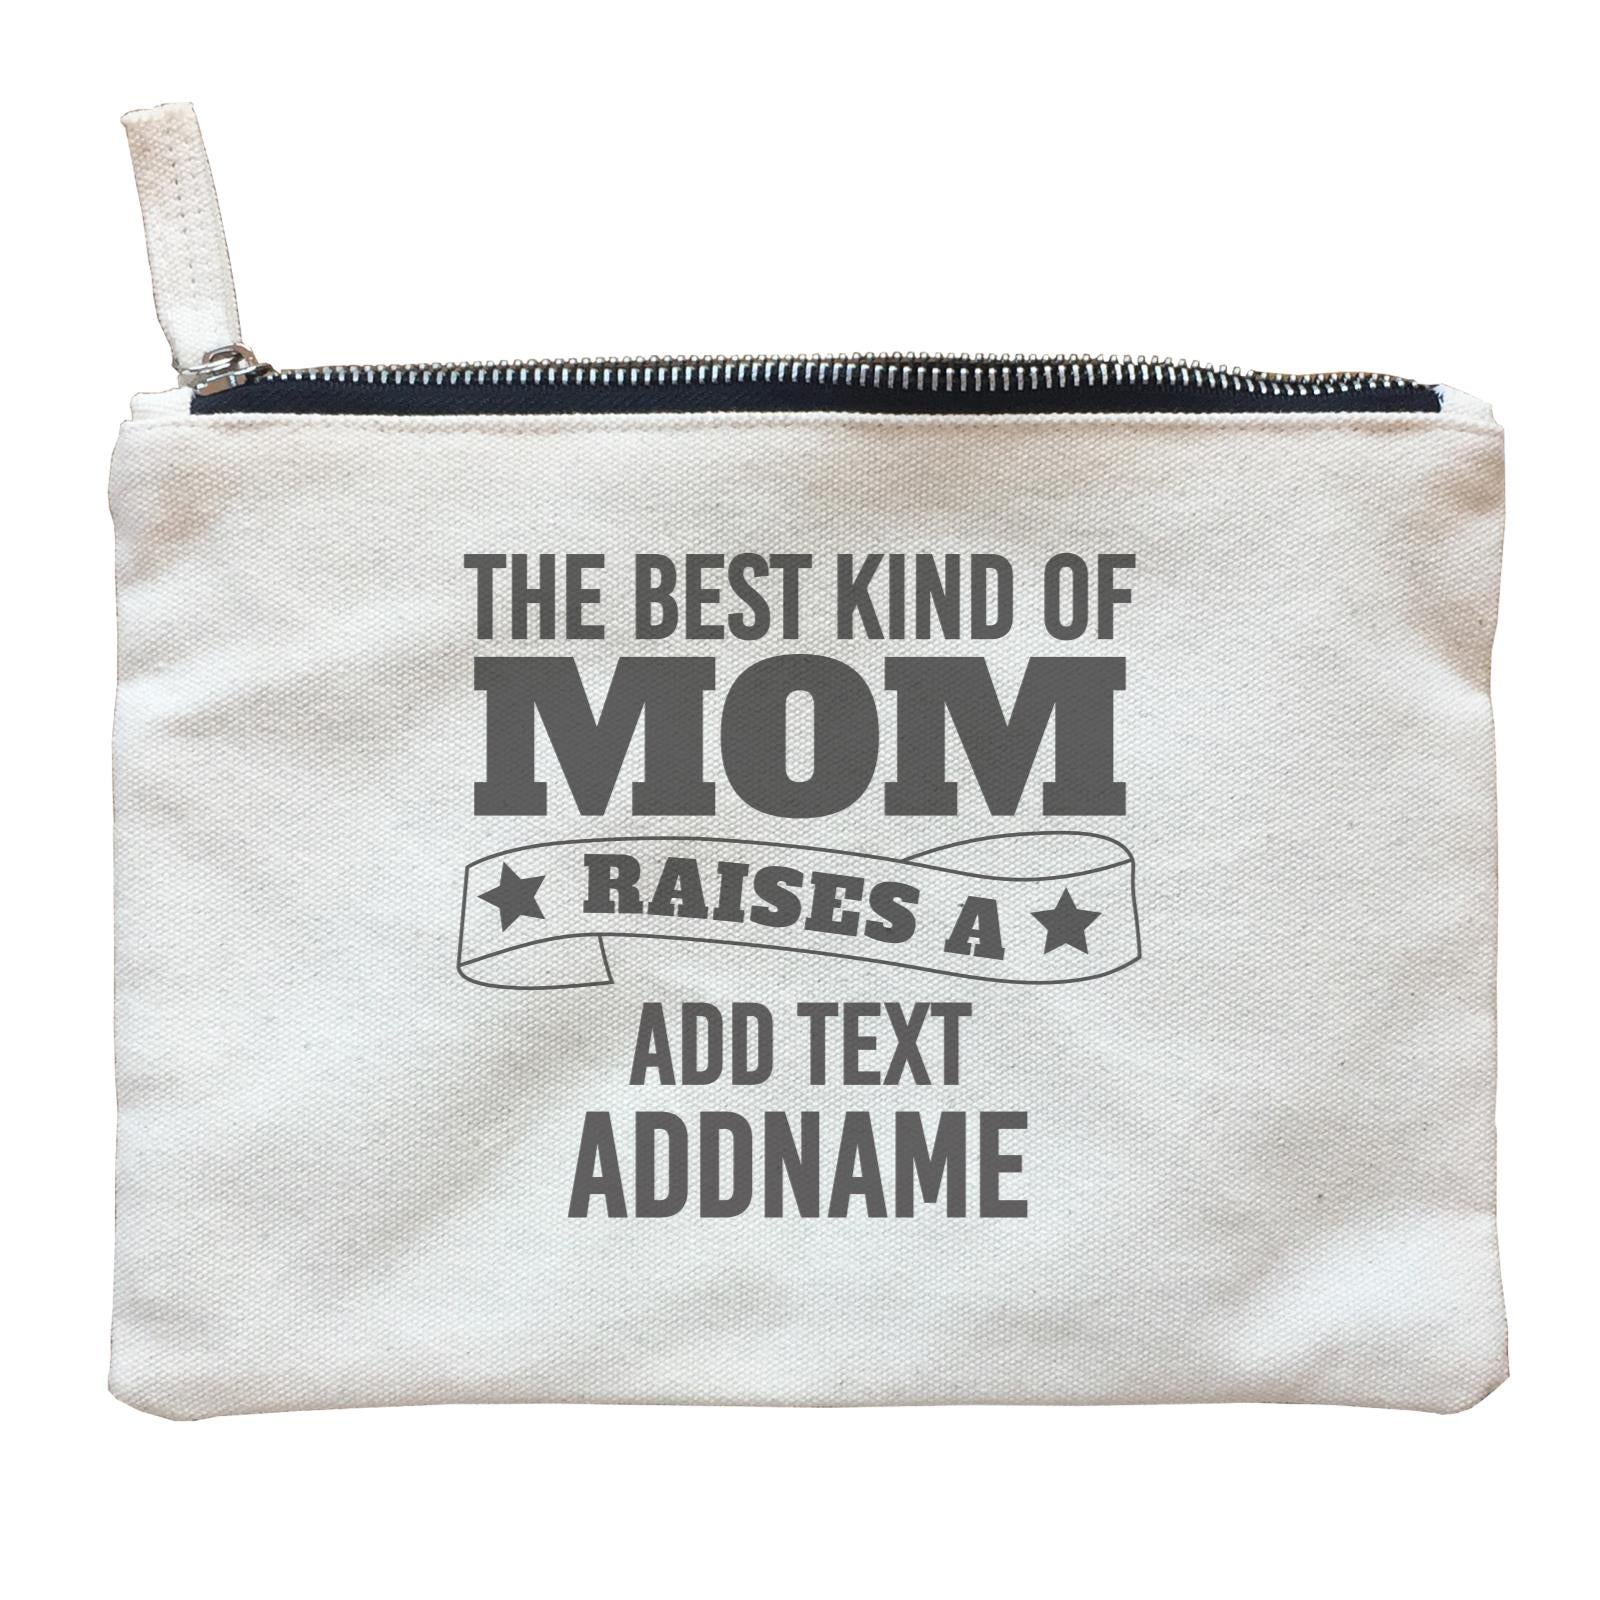 Awesome Mom 2 The Best Kind Of Mom Raises A Add Text And Addname Zipper Pouch